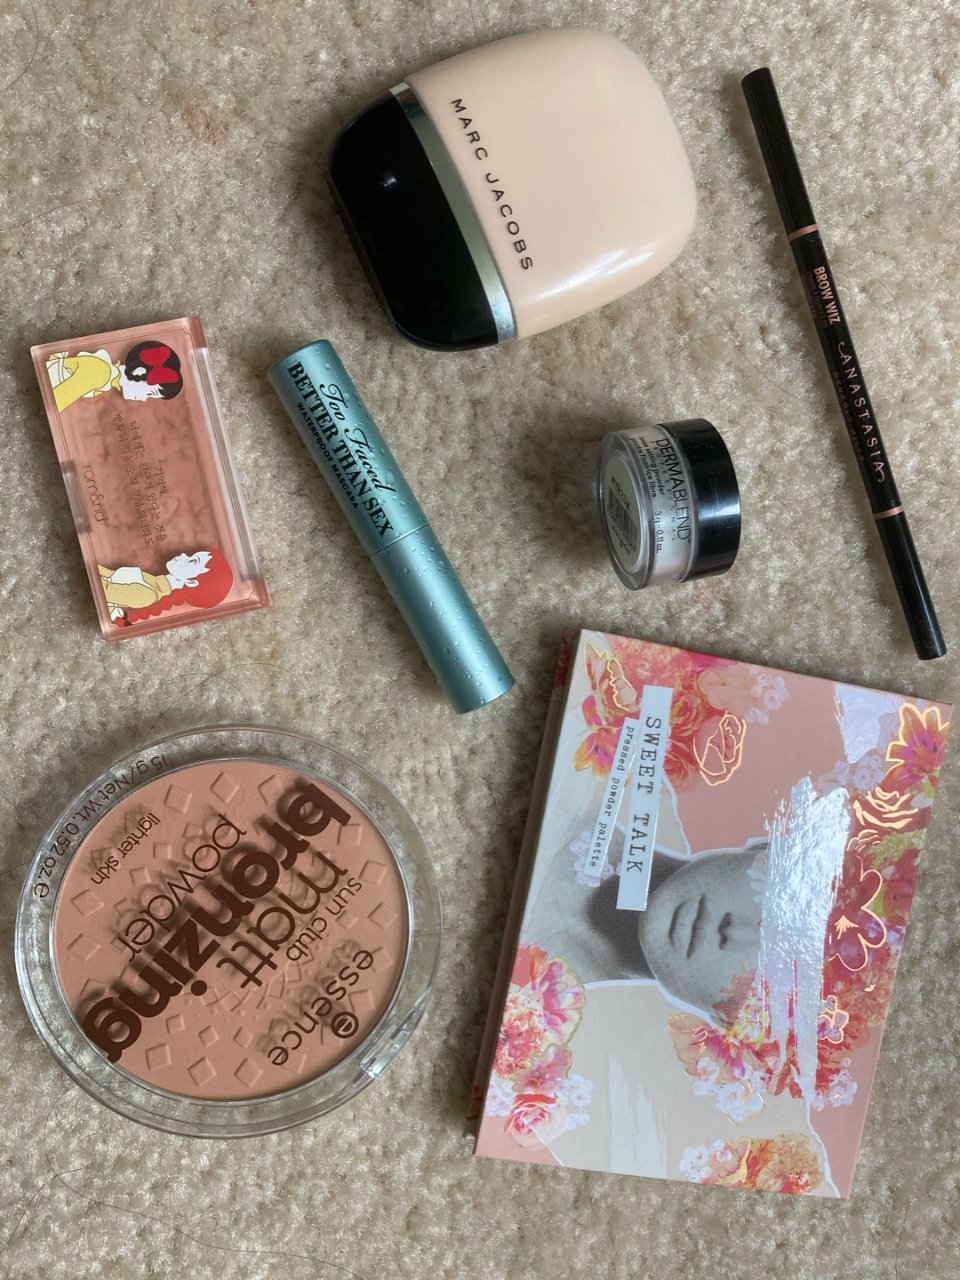 romand,Dermablend,Too Faced